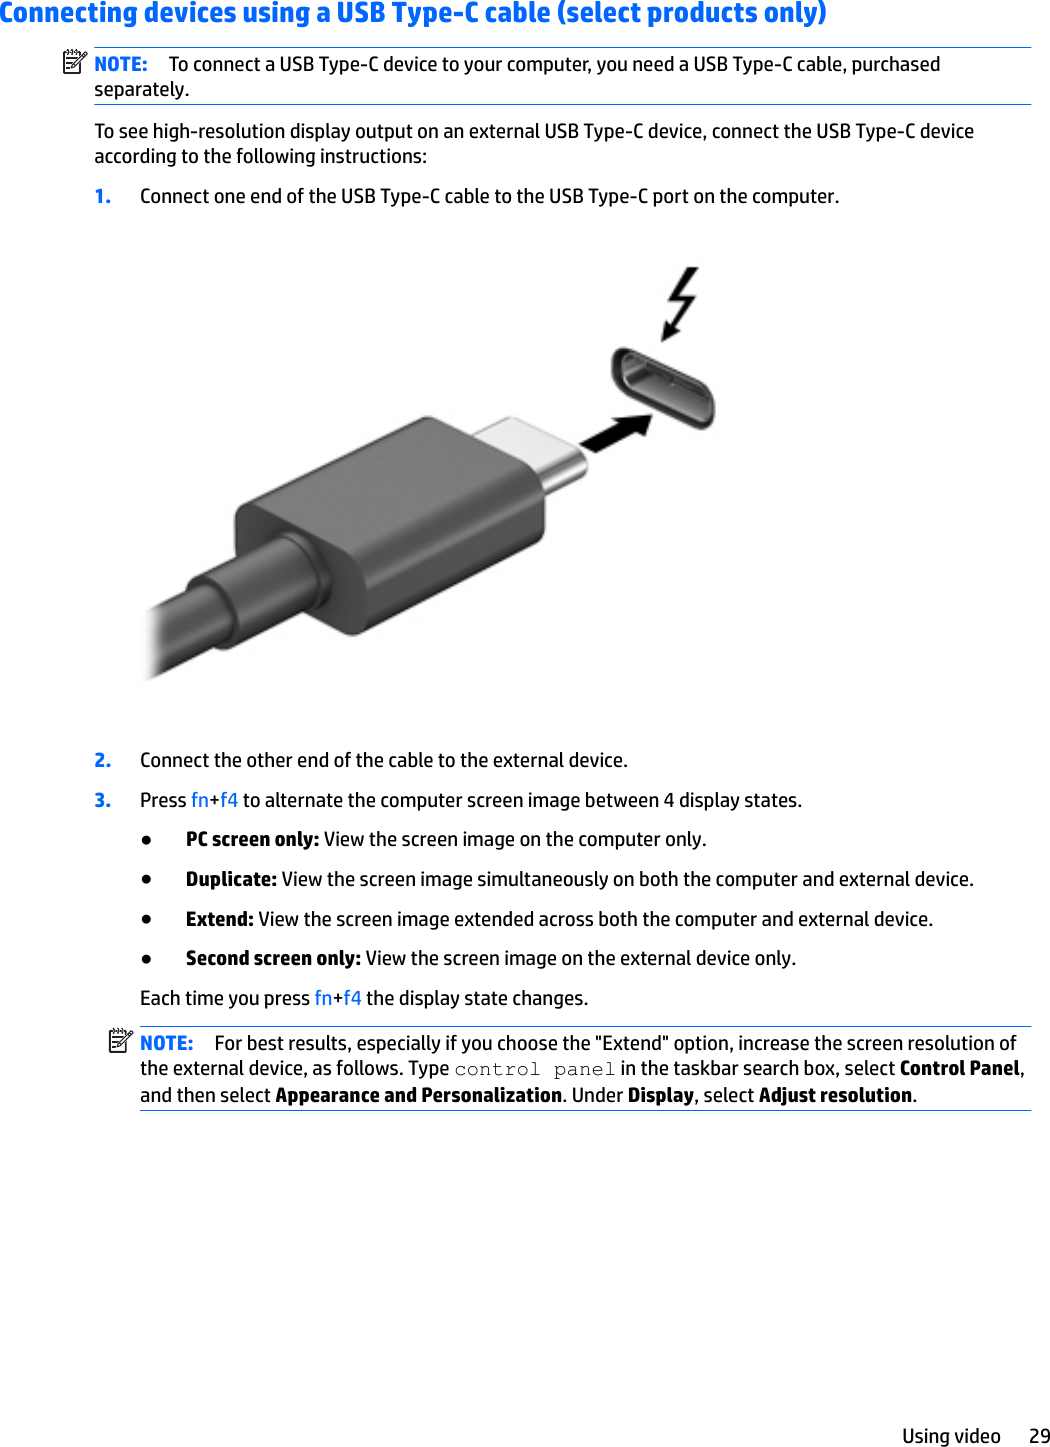 Connecting devices using a USB Type-C cable (select products only)NOTE: To connect a USB Type-C device to your computer, you need a USB Type-C cable, purchased separately.To see high-resolution display output on an external USB Type-C device, connect the USB Type-C device according to the following instructions:1. Connect one end of the USB Type-C cable to the USB Type-C port on the computer.2. Connect the other end of the cable to the external device.3. Press fn+f4 to alternate the computer screen image between 4 display states.●PC screen only: View the screen image on the computer only.●Duplicate: View the screen image simultaneously on both the computer and external device.●Extend: View the screen image extended across both the computer and external device.●Second screen only: View the screen image on the external device only.Each time you press fn+f4 the display state changes.NOTE: For best results, especially if you choose the &quot;Extend&quot; option, increase the screen resolution of the external device, as follows. Type control panel in the taskbar search box, select Control Panel, and then select Appearance and Personalization. Under Display, select Adjust resolution.Using video 29